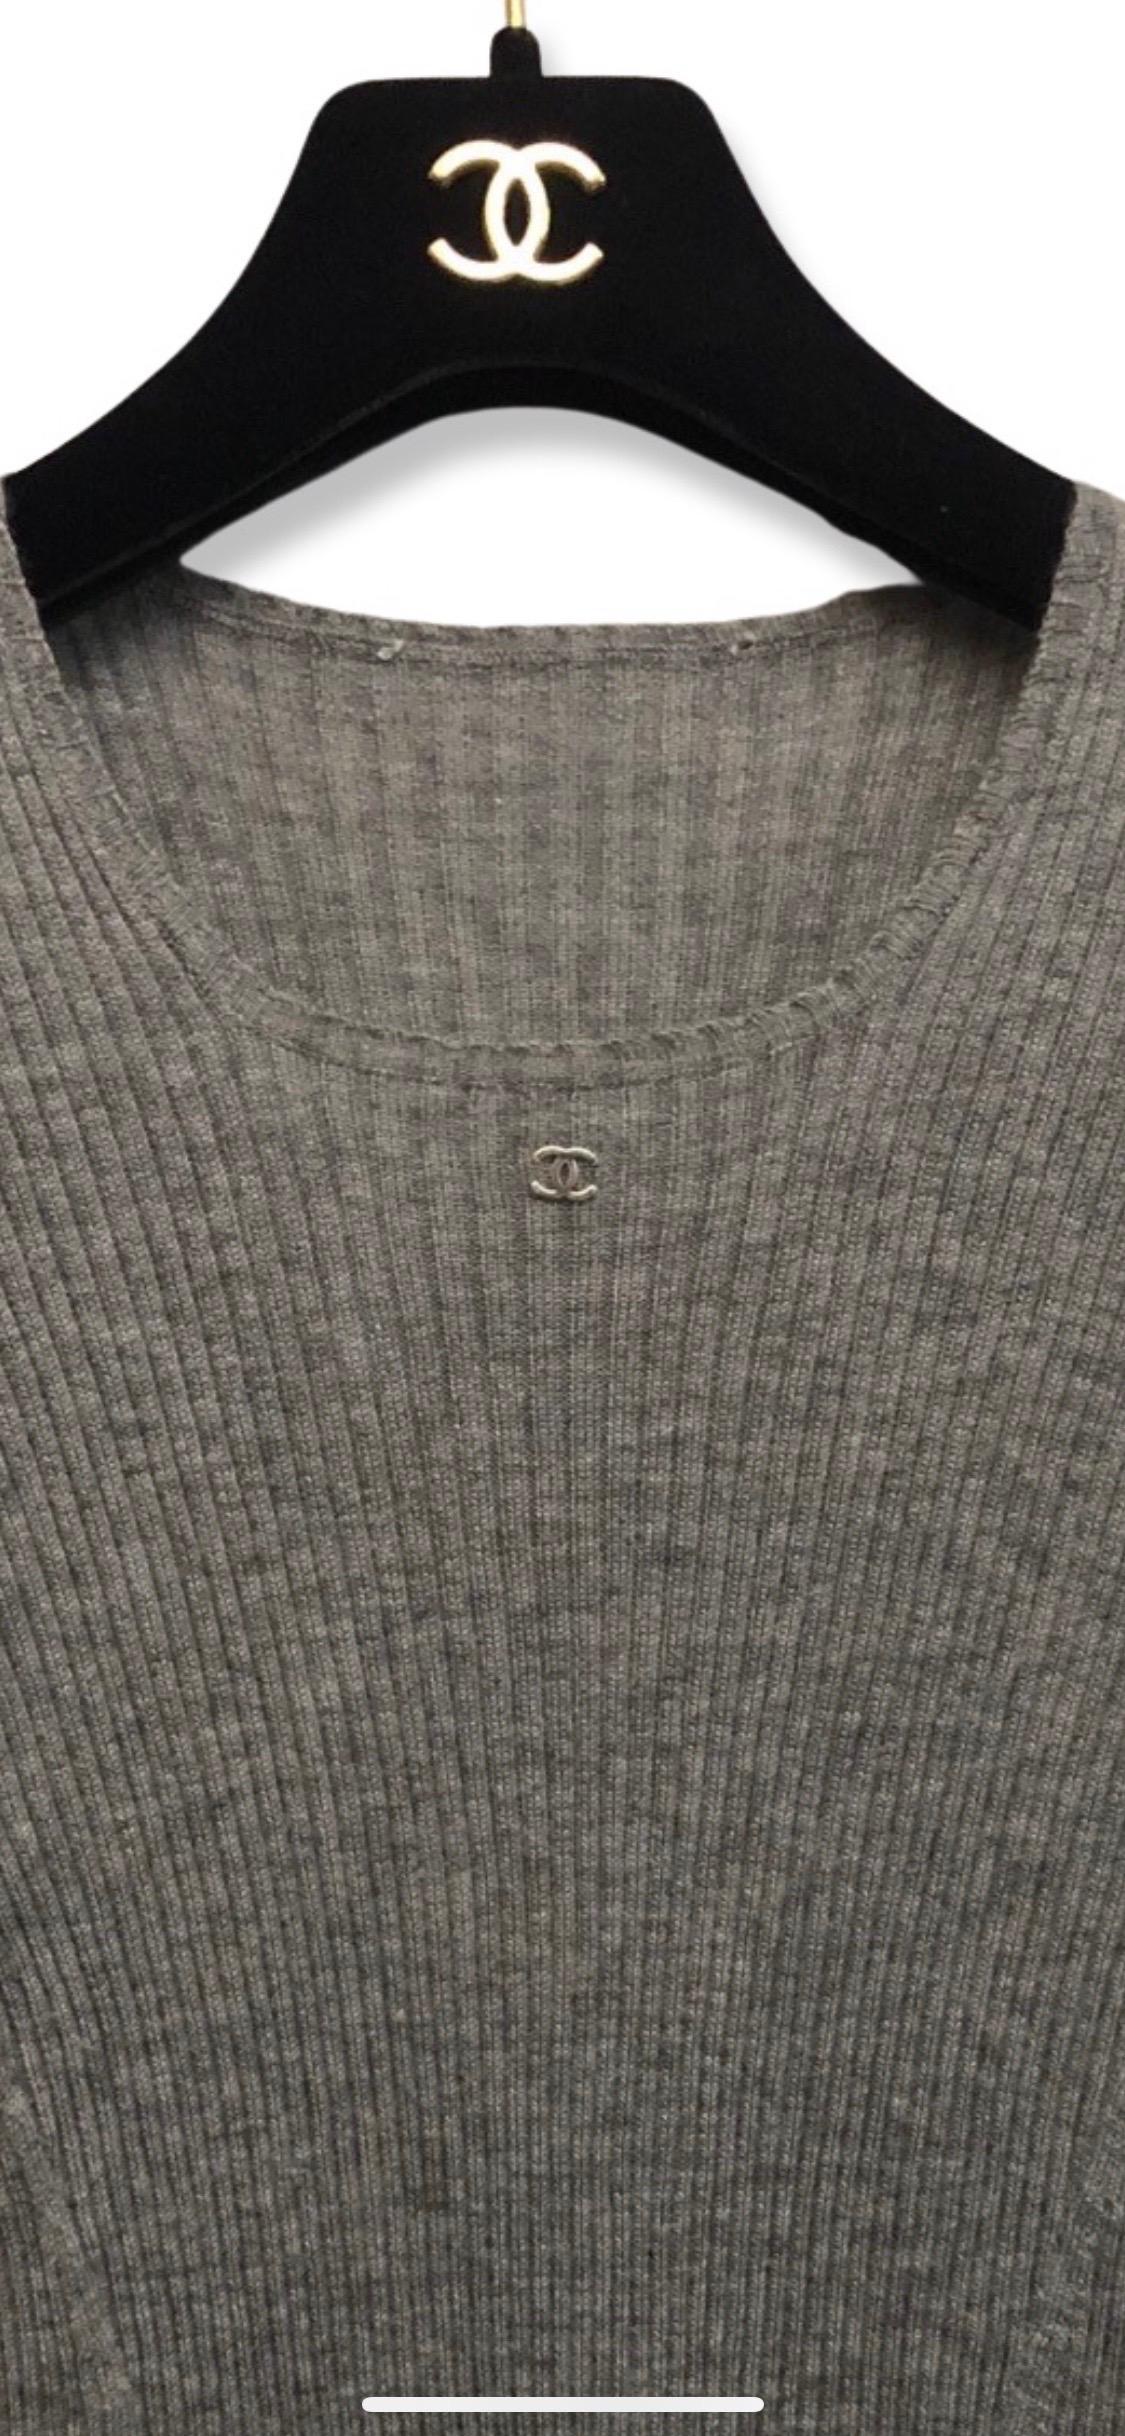 - Chanel grey cashmere and silk short sleeves top from A/W 1998.

- Silver CC hardware logo. 

- There is no tag. It fits like a size 40. 